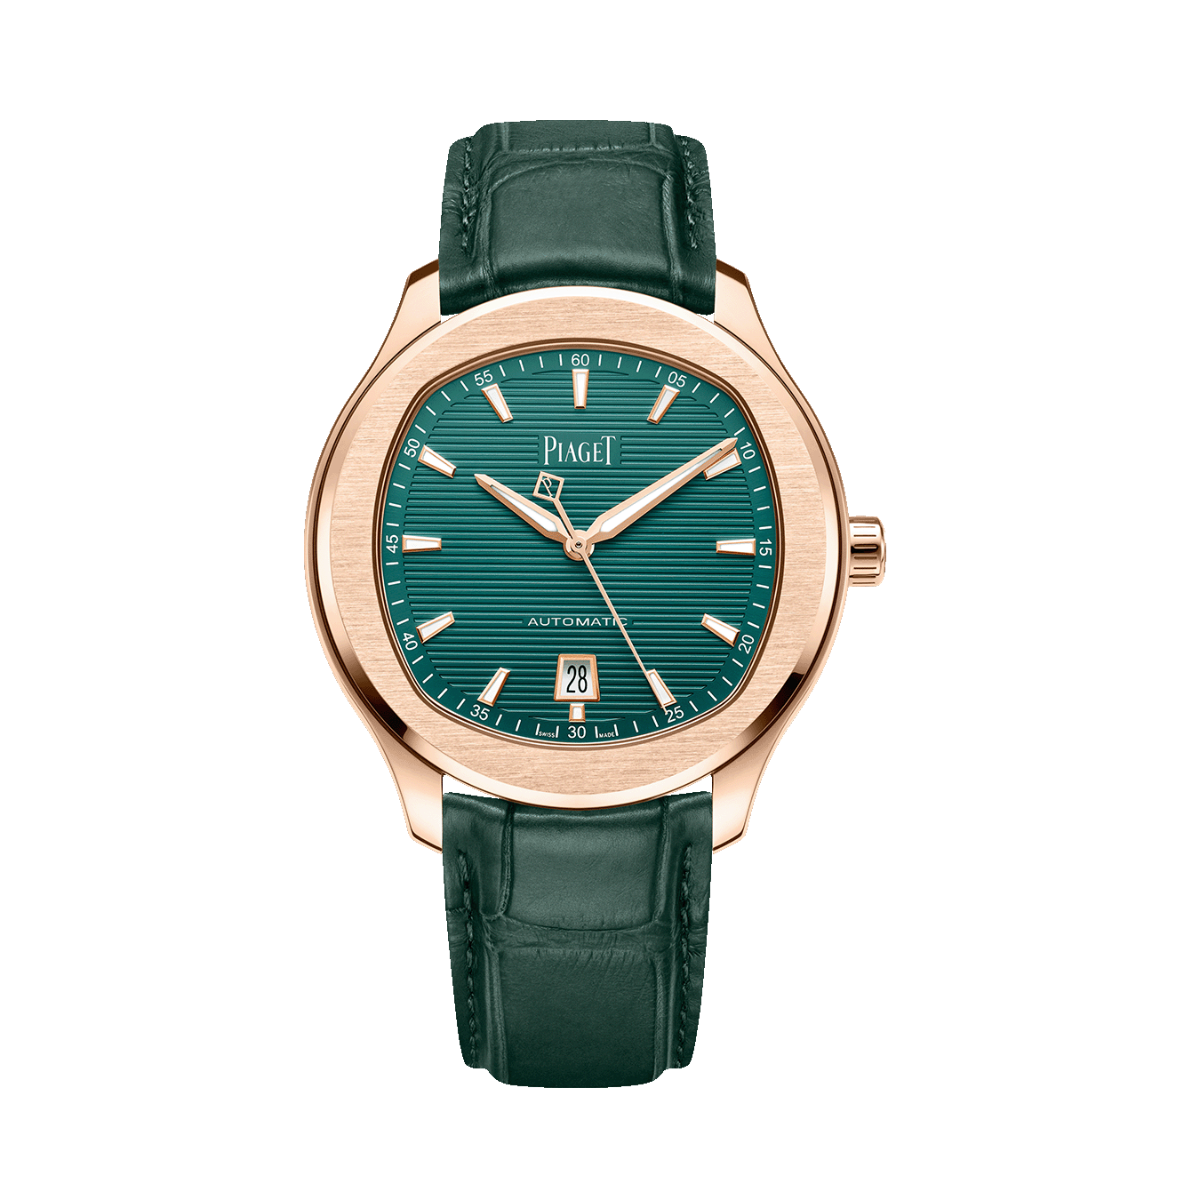 Piaget Polo 42 mm - Front